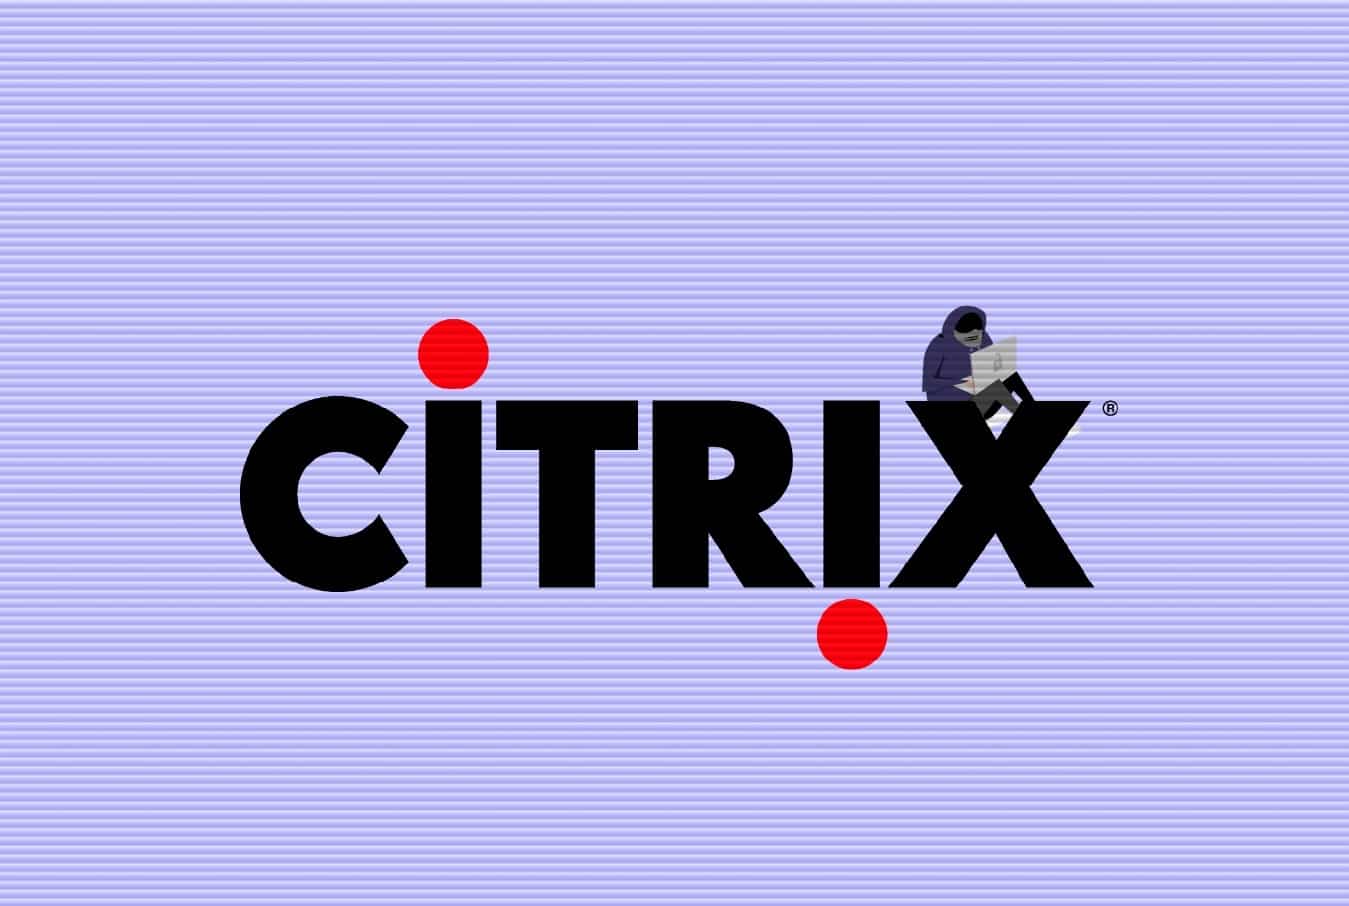 Citrix allegedly hacked exposing database with 2000,000 users